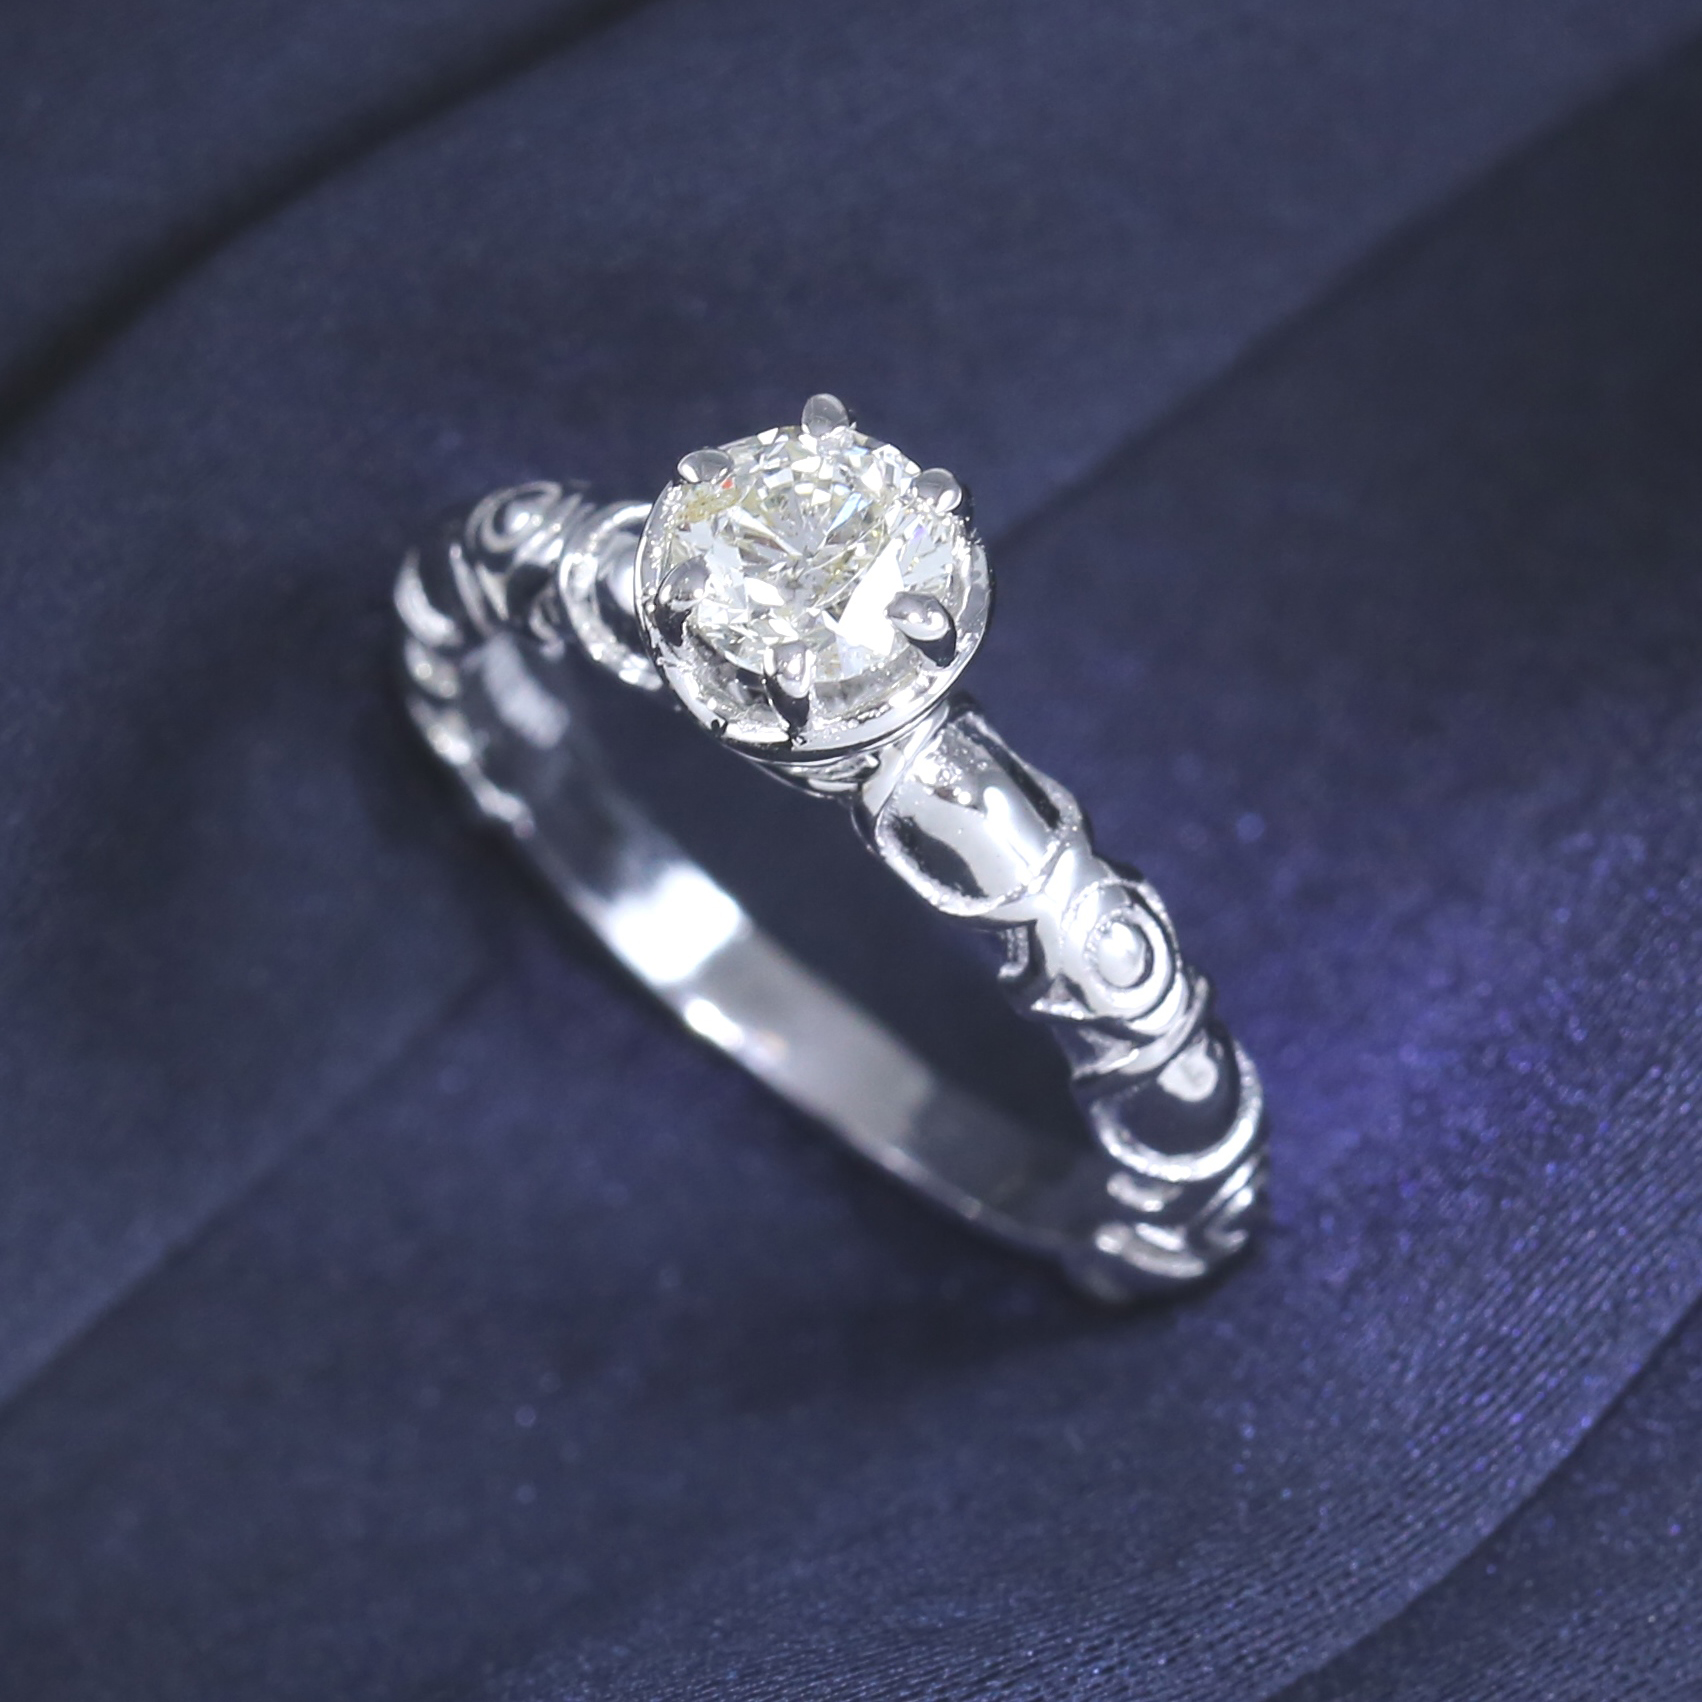 14 K / 585 White Gold Solitaire Diamond Ring - Image 9 of 9